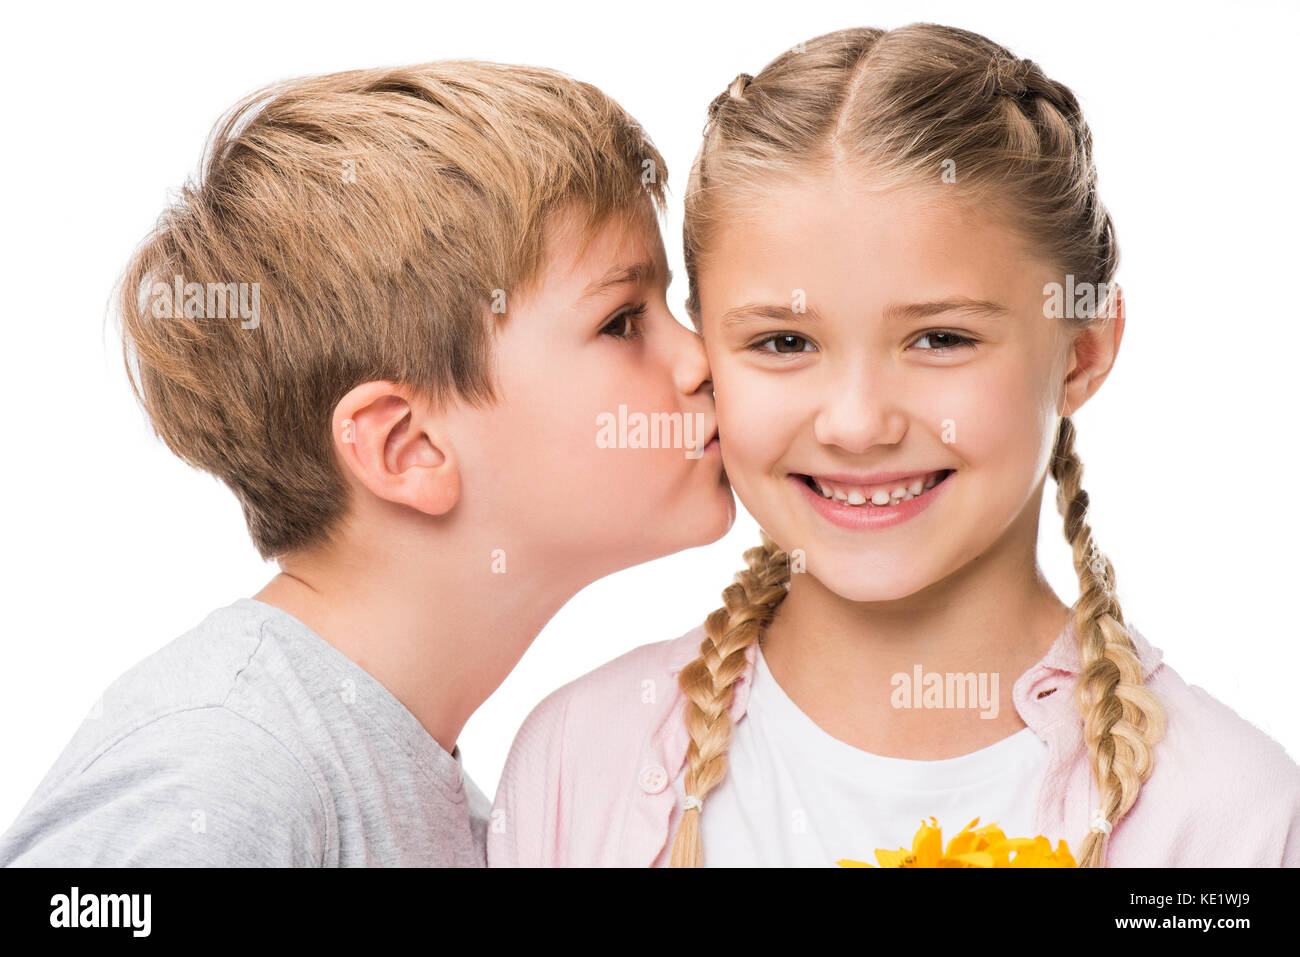 close-up portrait of cute little boy kissing happy girl isolated ...